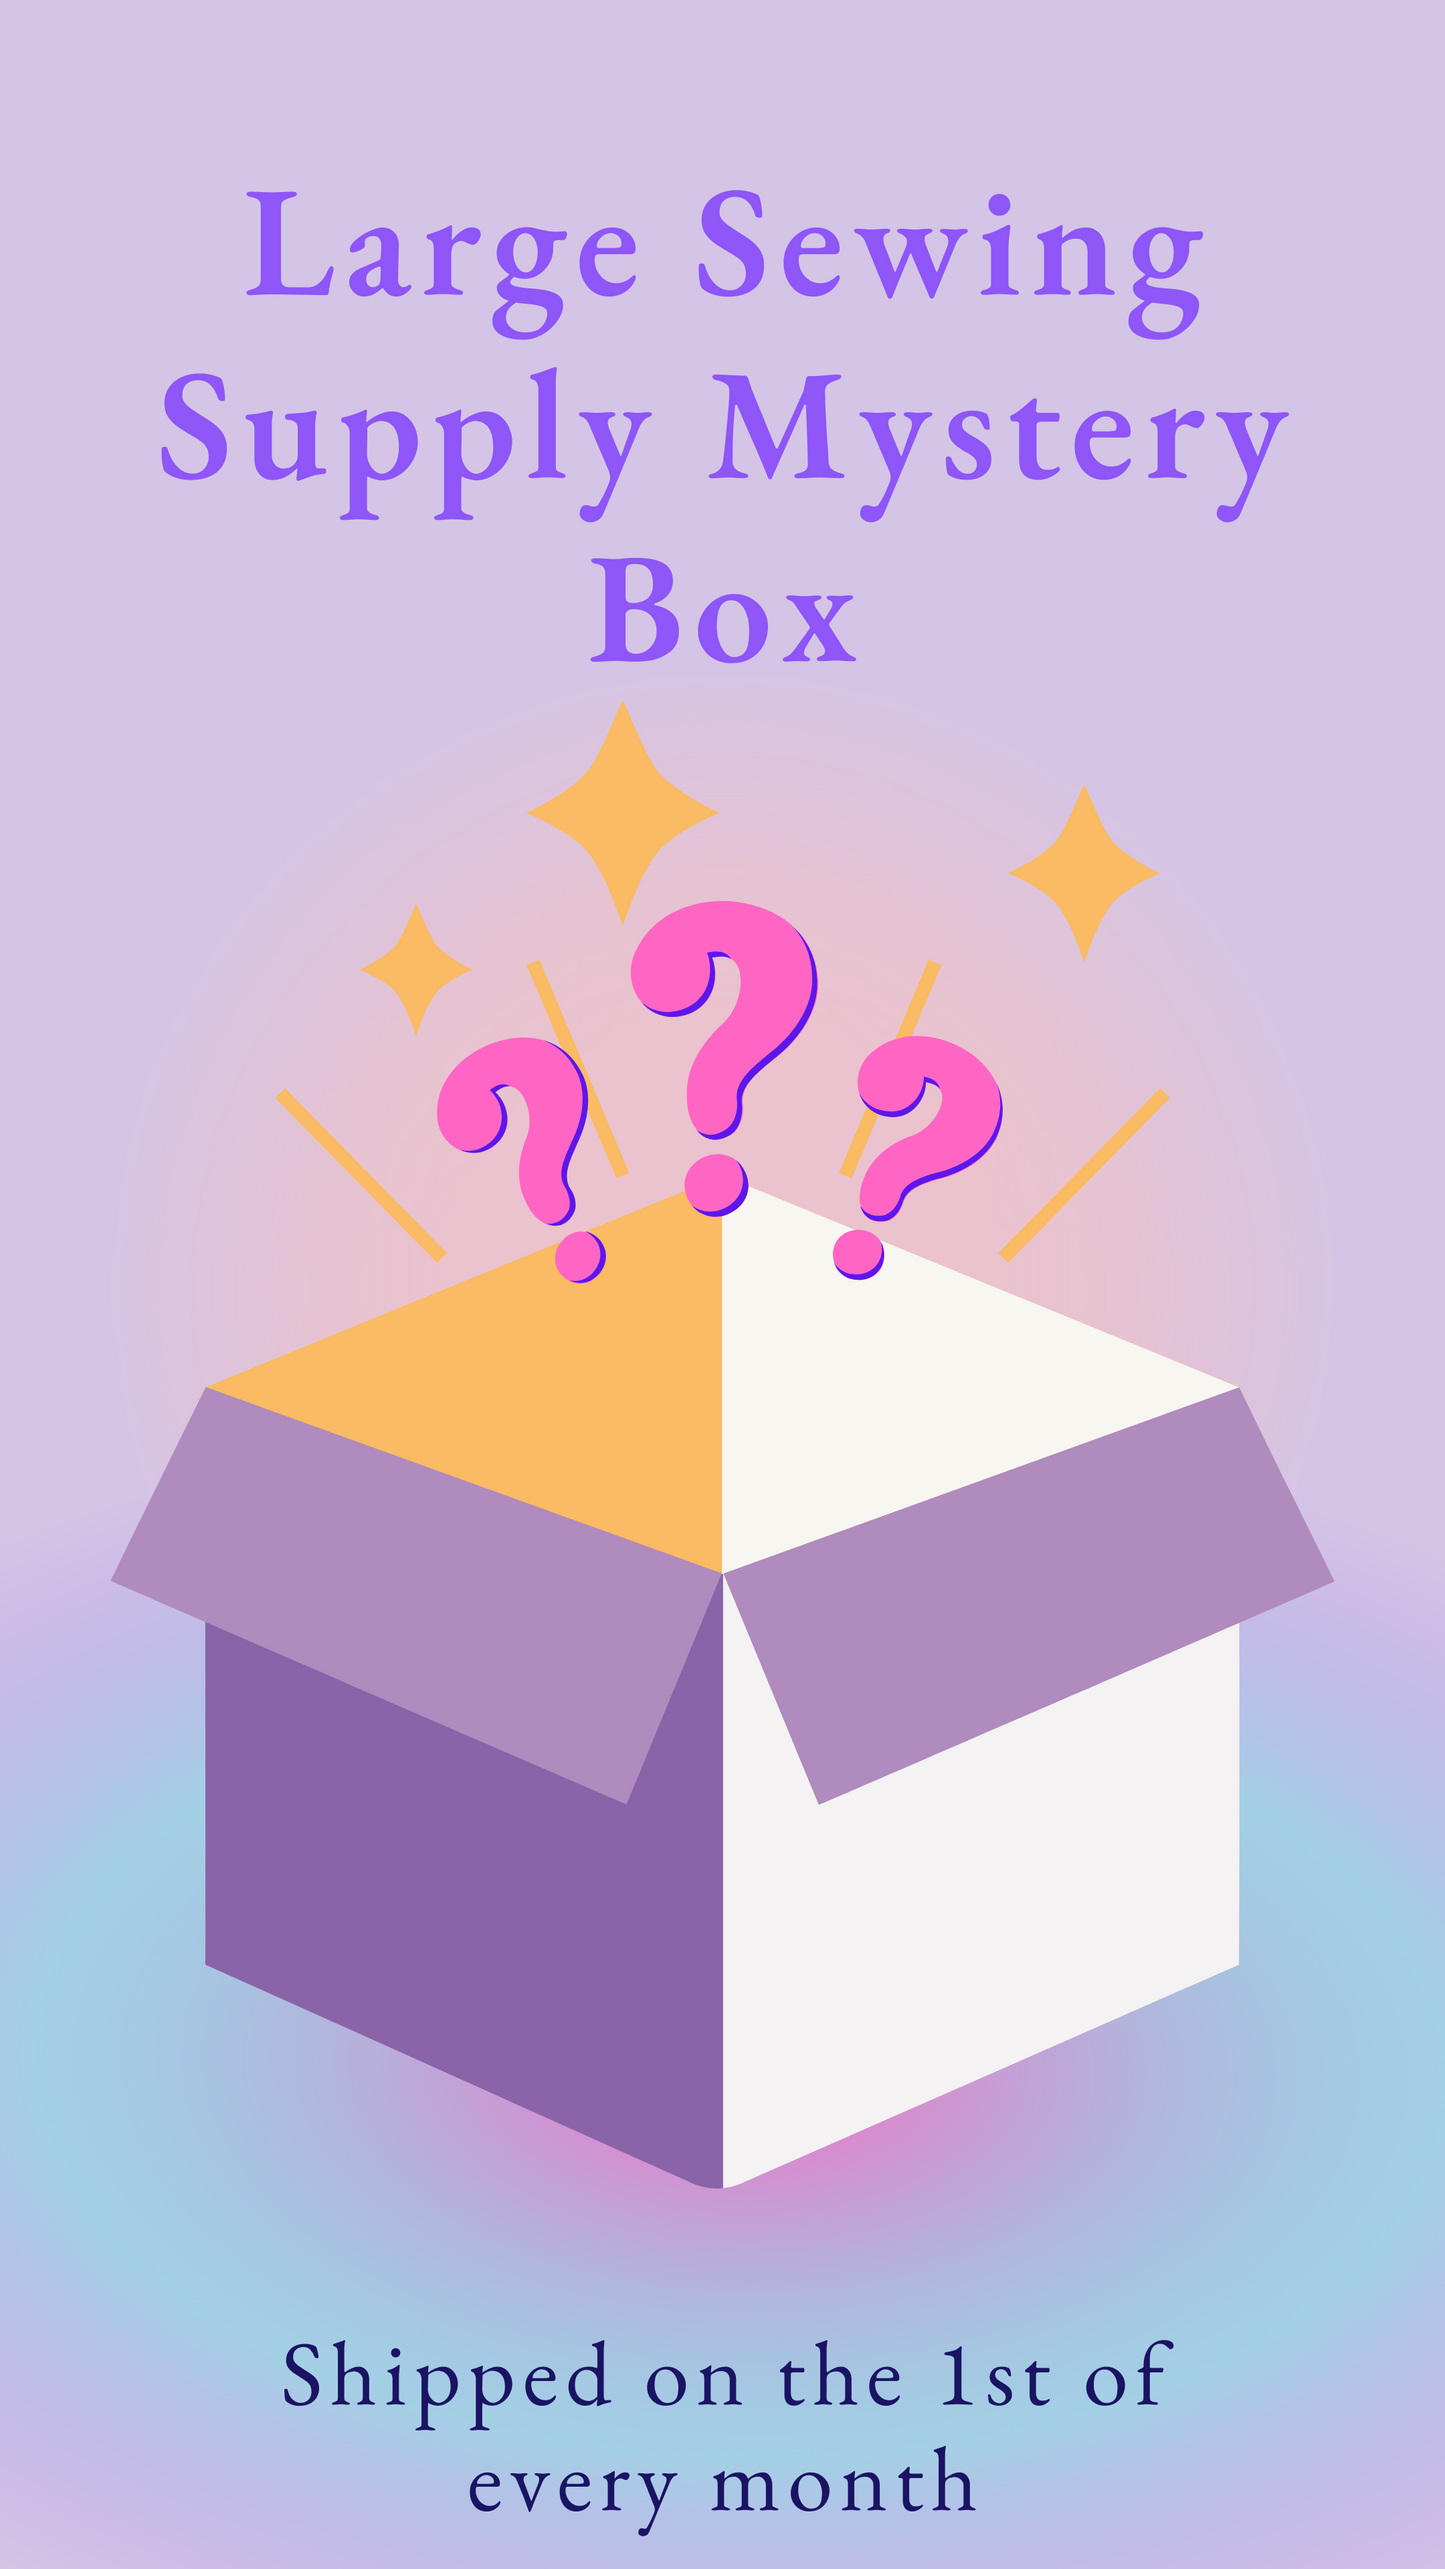 Large Sewing Supply Mystery Box